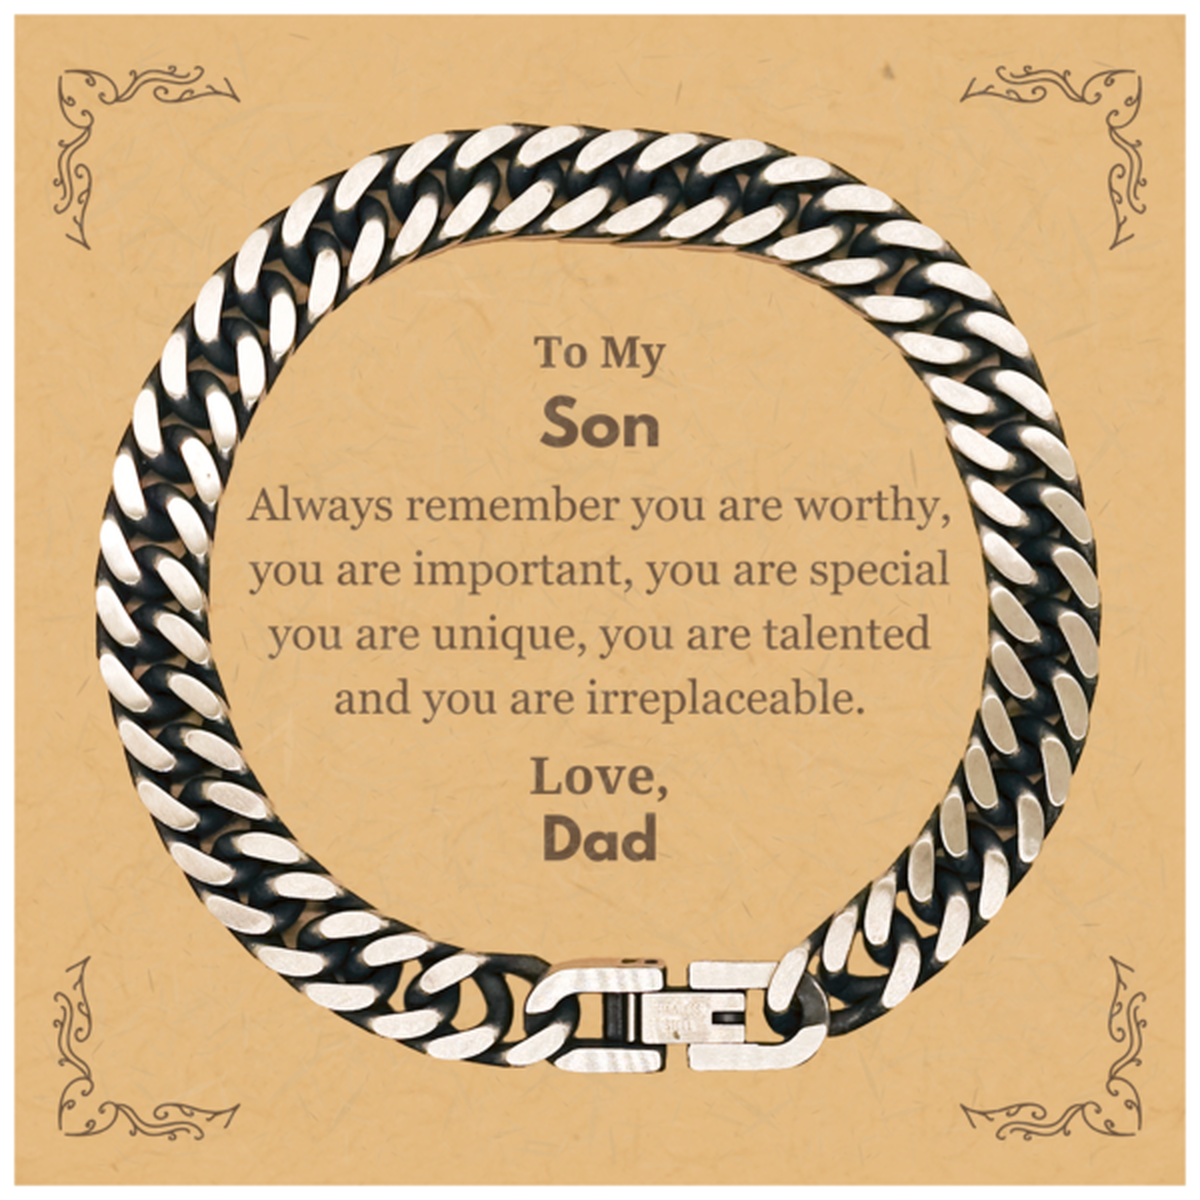 Son Birthday Gifts from Dad, Inspirational Cuban Link Chain Bracelet for Son Christmas Graduation Gifts for Son Always remember you are worthy, you are important. Love, Dad